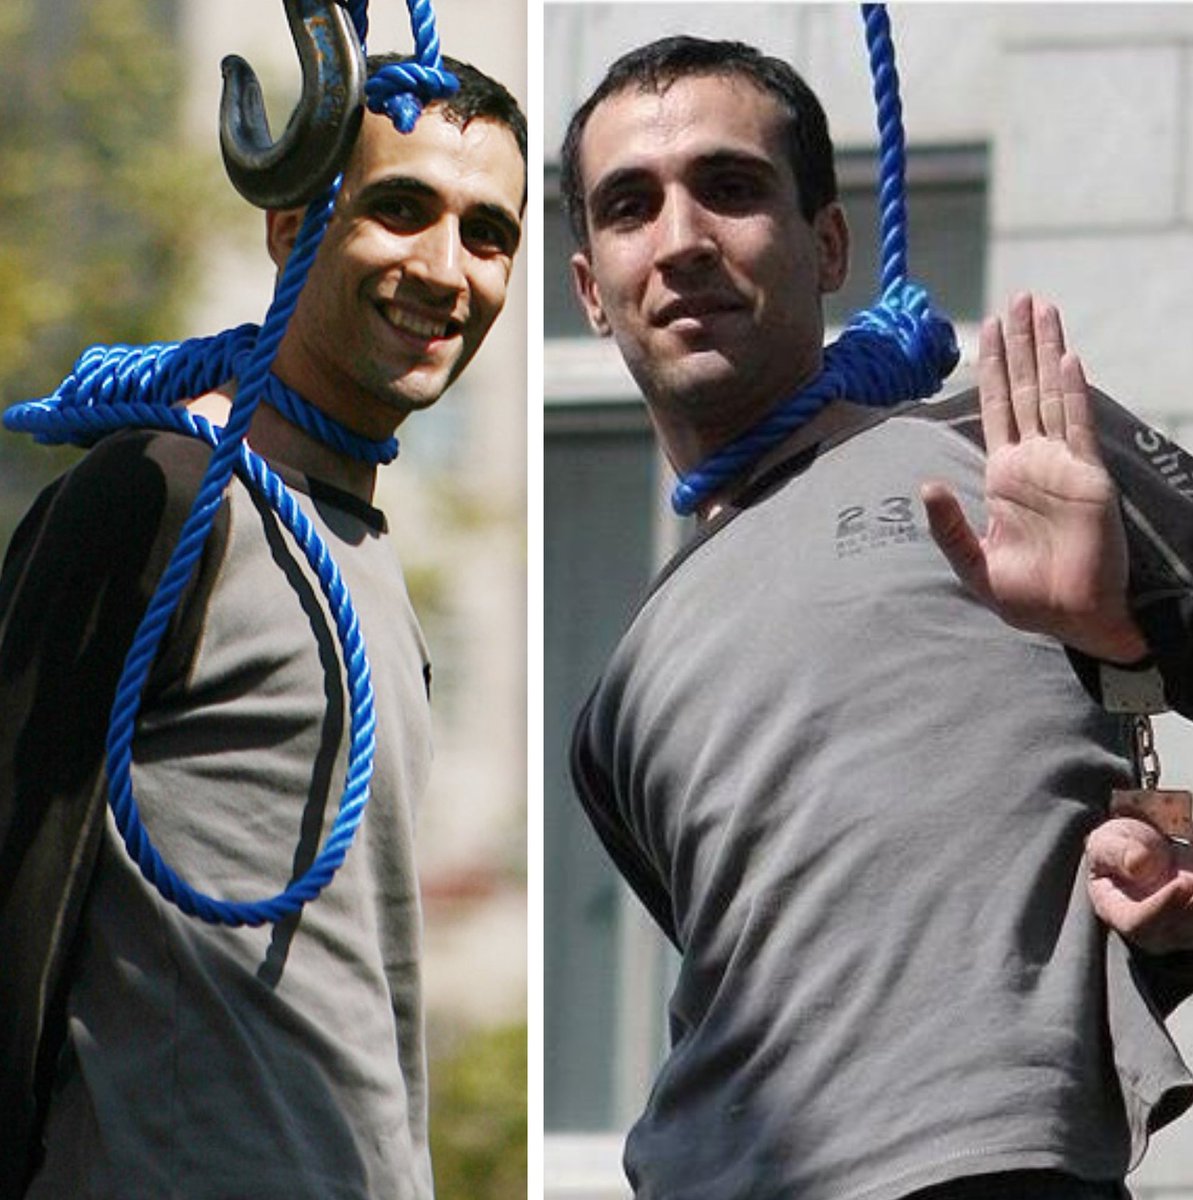 🧵 Thread “I reached the point at which I decided to eradicate any injustice…and I would do it again if I could” Majid Kavousifar smiled as he was slowly executed in public for taking revenge on a judge of the Islamic Republic of Iran.